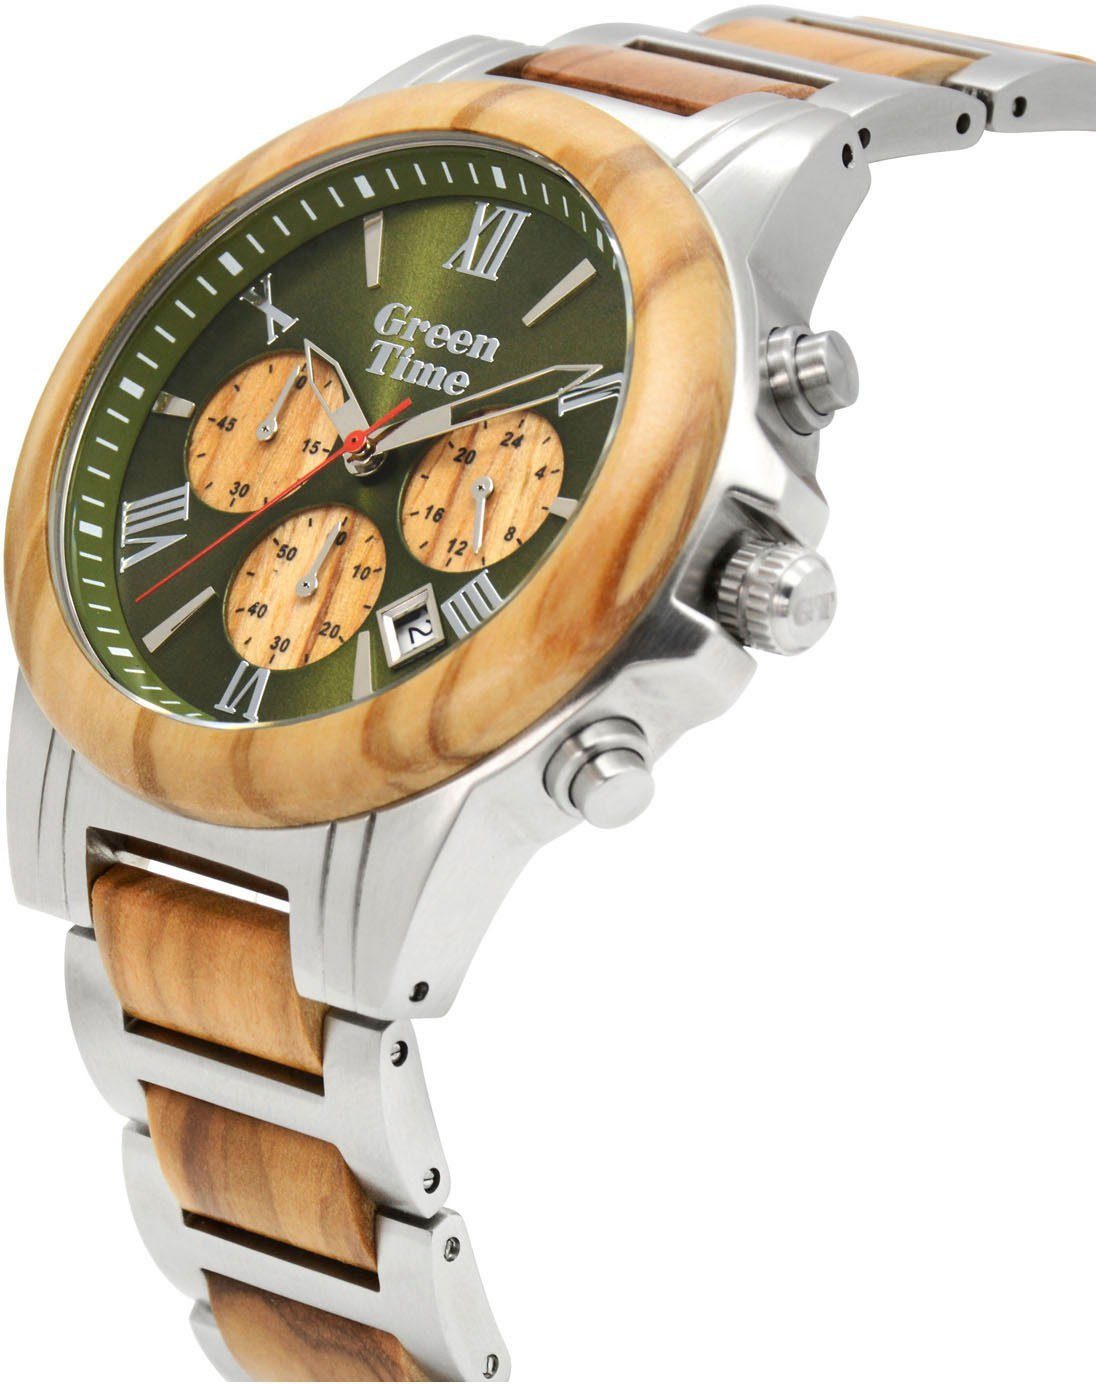 Holz ZW163A, GreenTime Chronograph